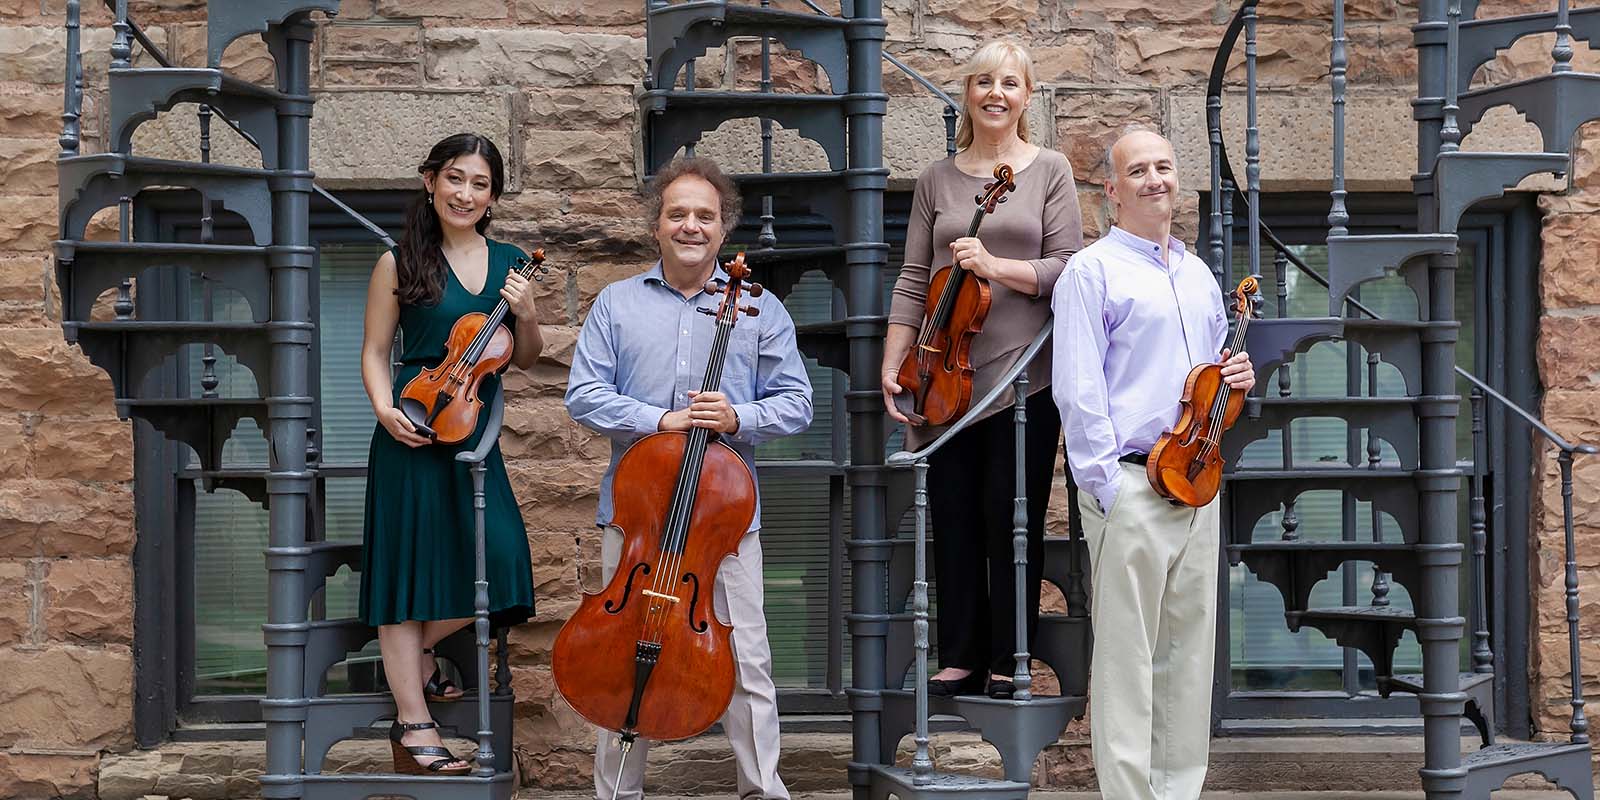 Takacs Quartet posing in front of a brick building with stairs.